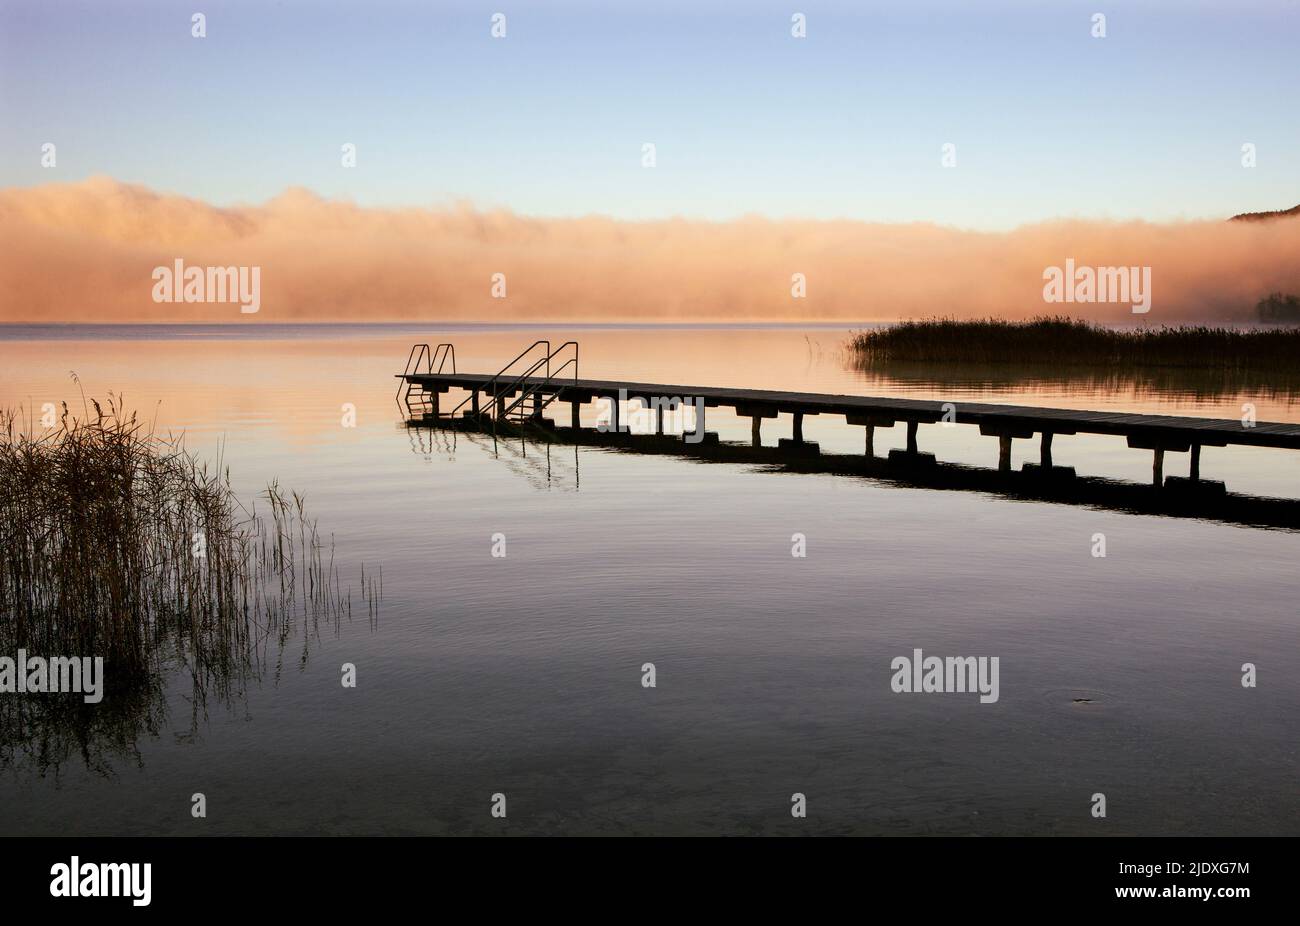 Austria, Upper Austria, Bathing jetty on shore of Mondsee lake with thick morning fog in background Stock Photo